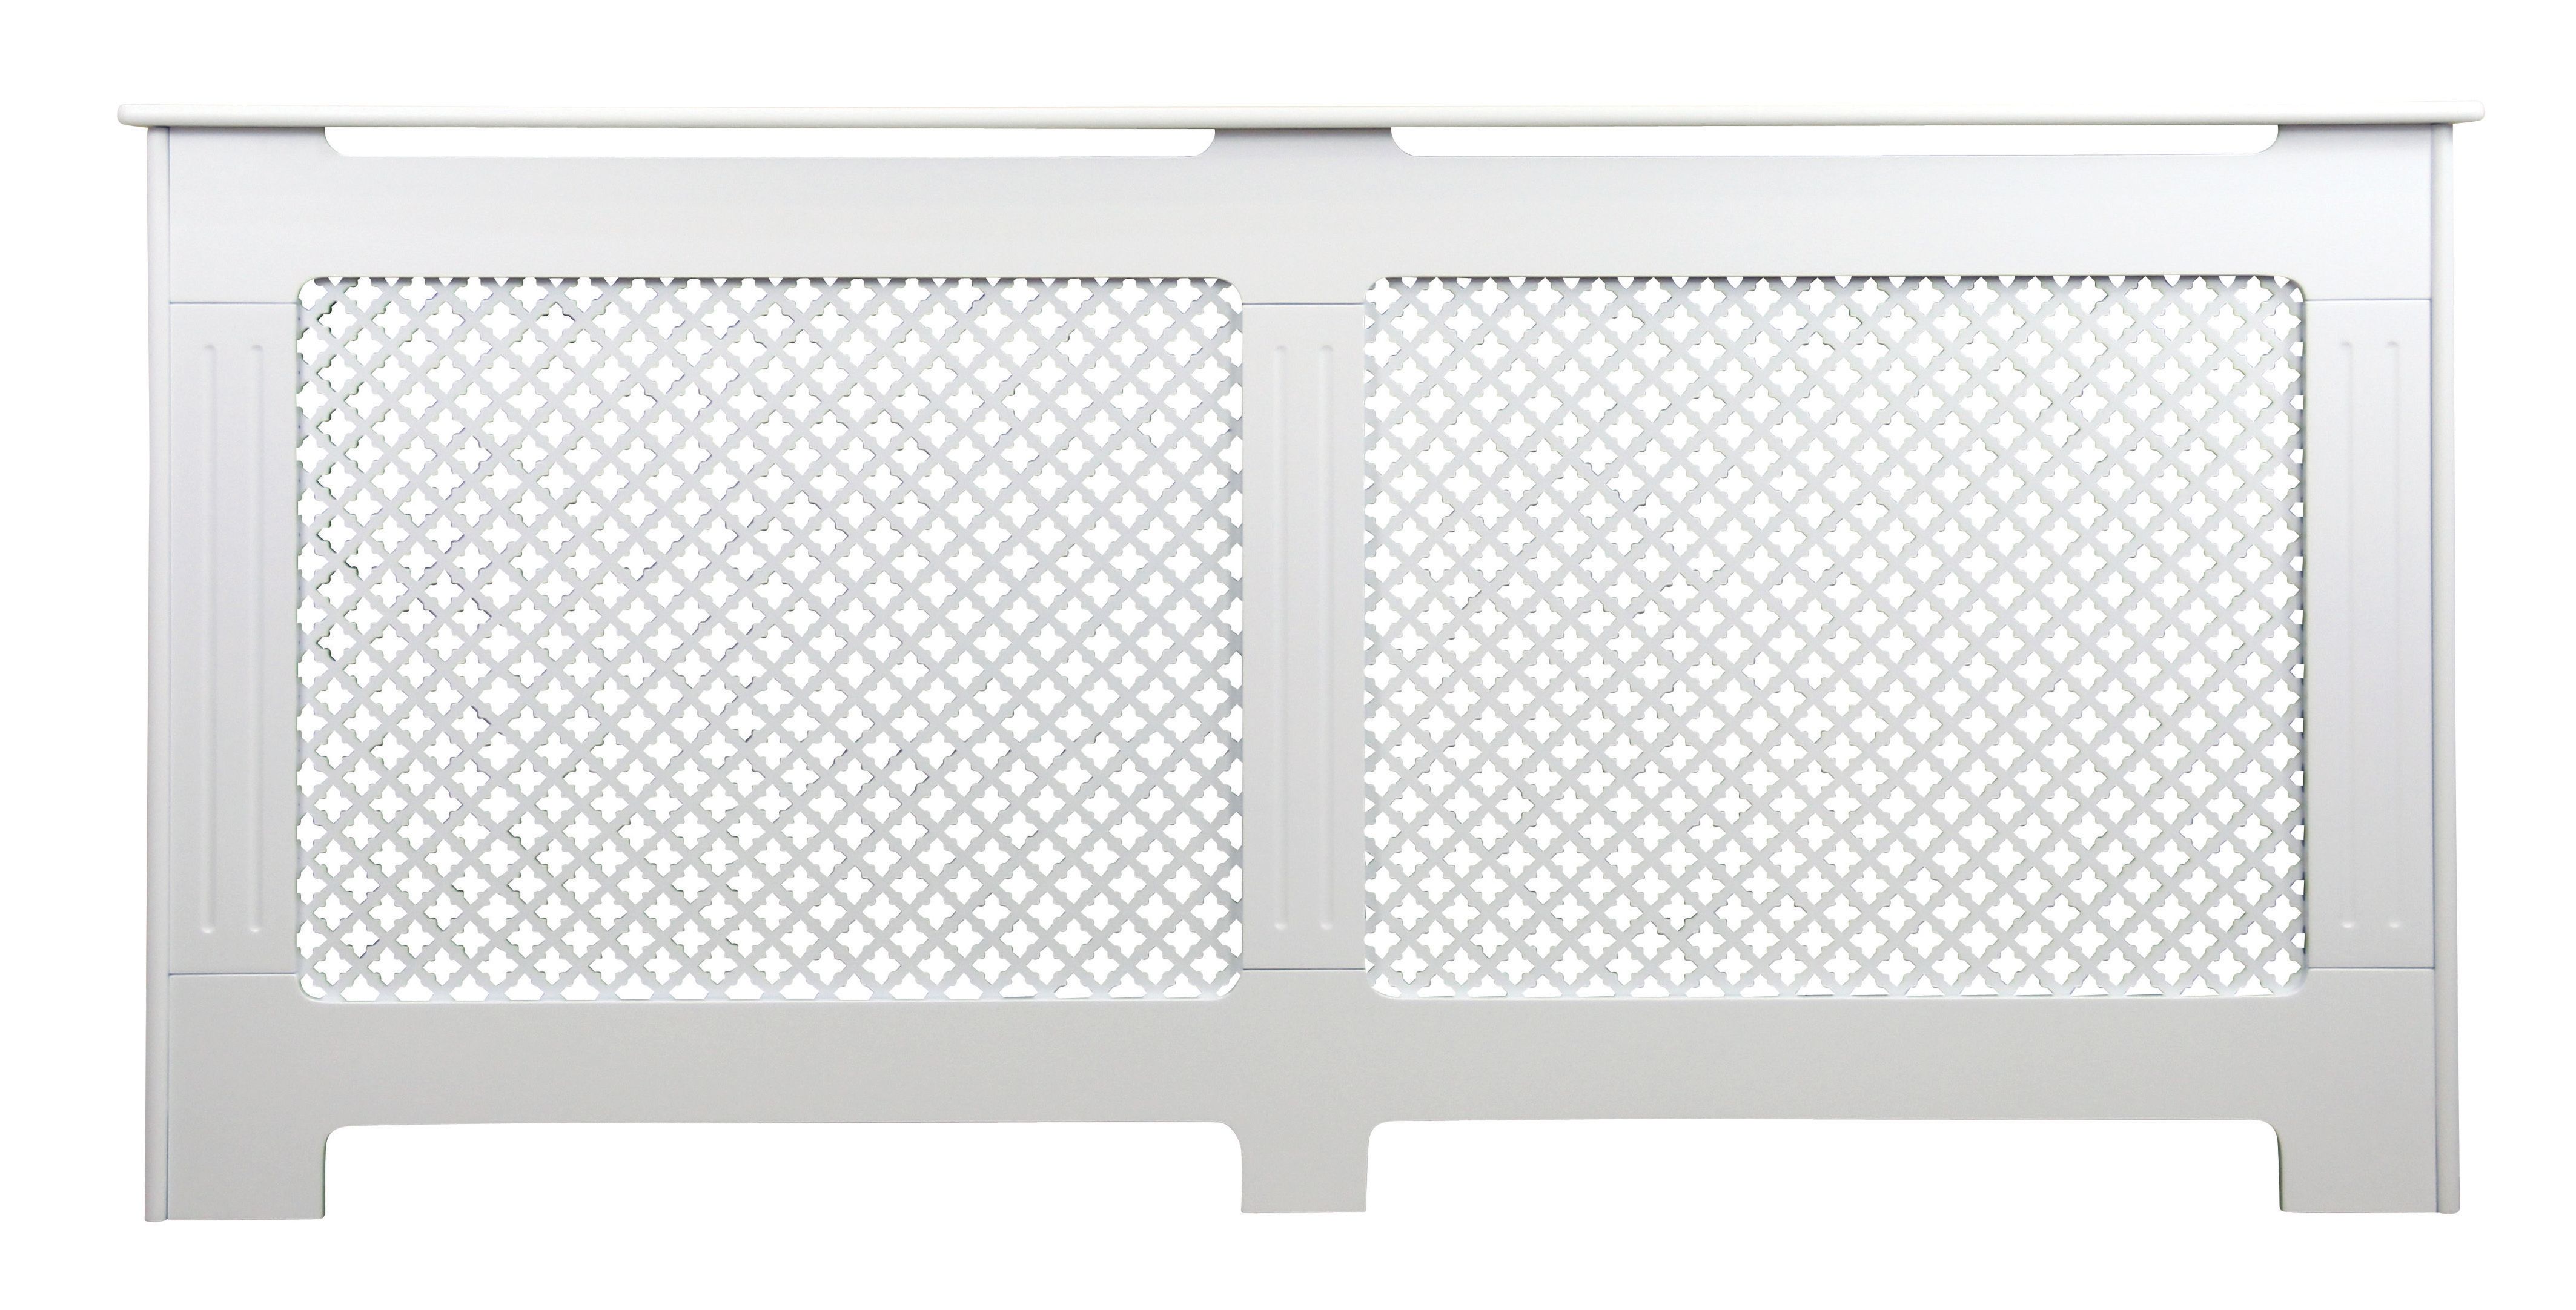 Image of Wickes Derwent Large Radiator Cover White - 1720 mm